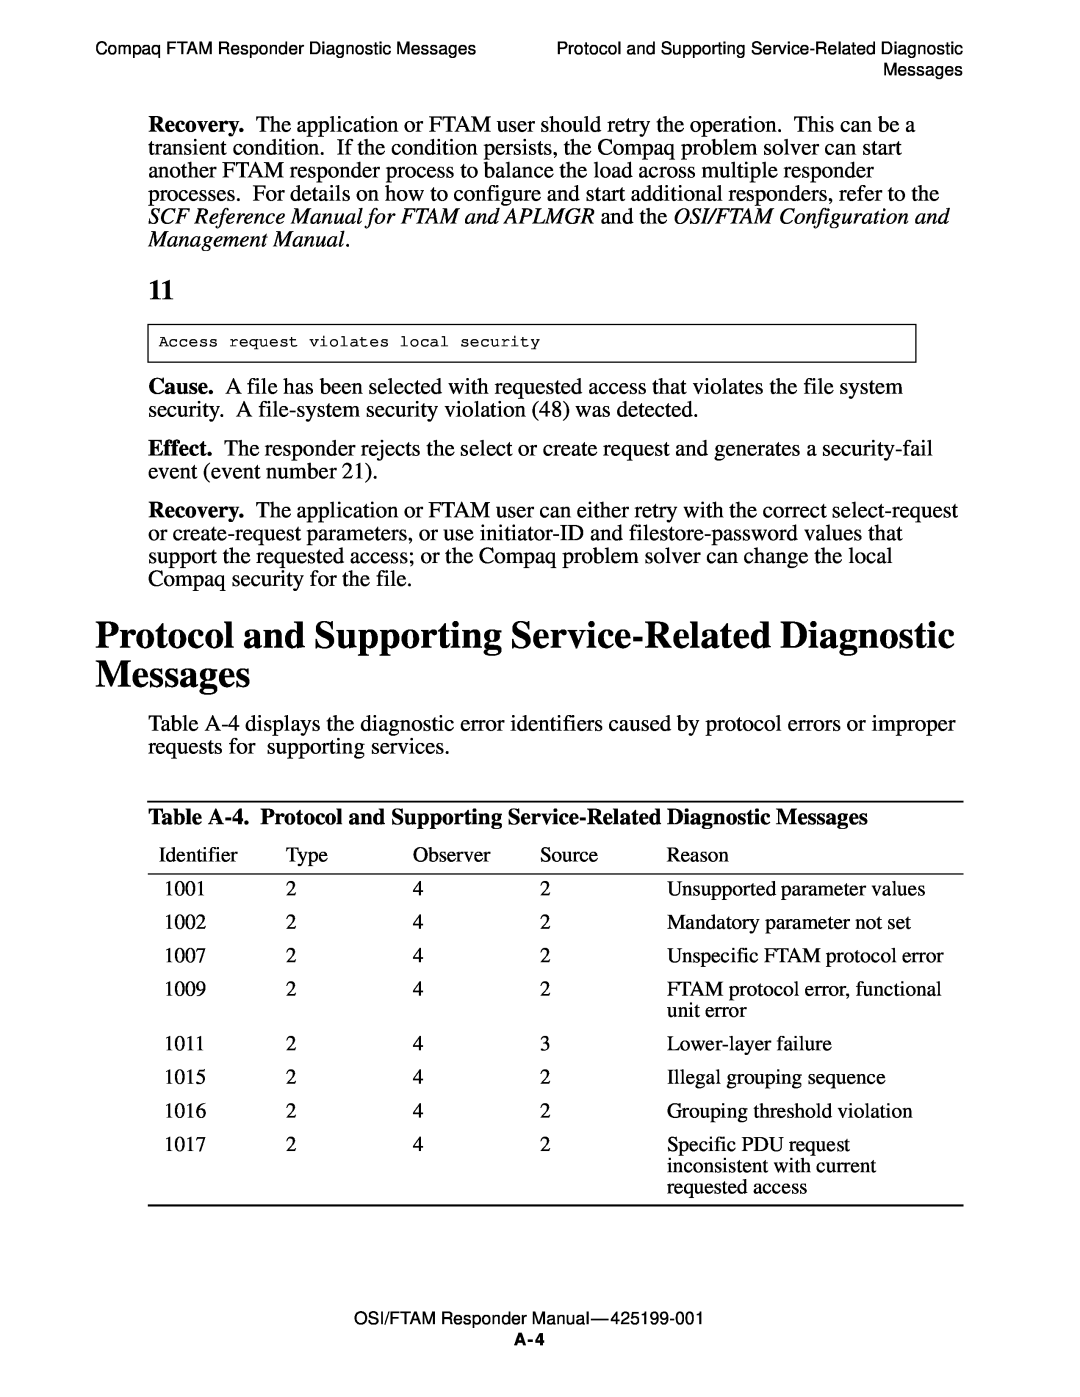 Compaq OSI/APLMGR D43, OSI/FTAM D43 manual Protocol and Supporting Service-Related Diagnostic Messages 